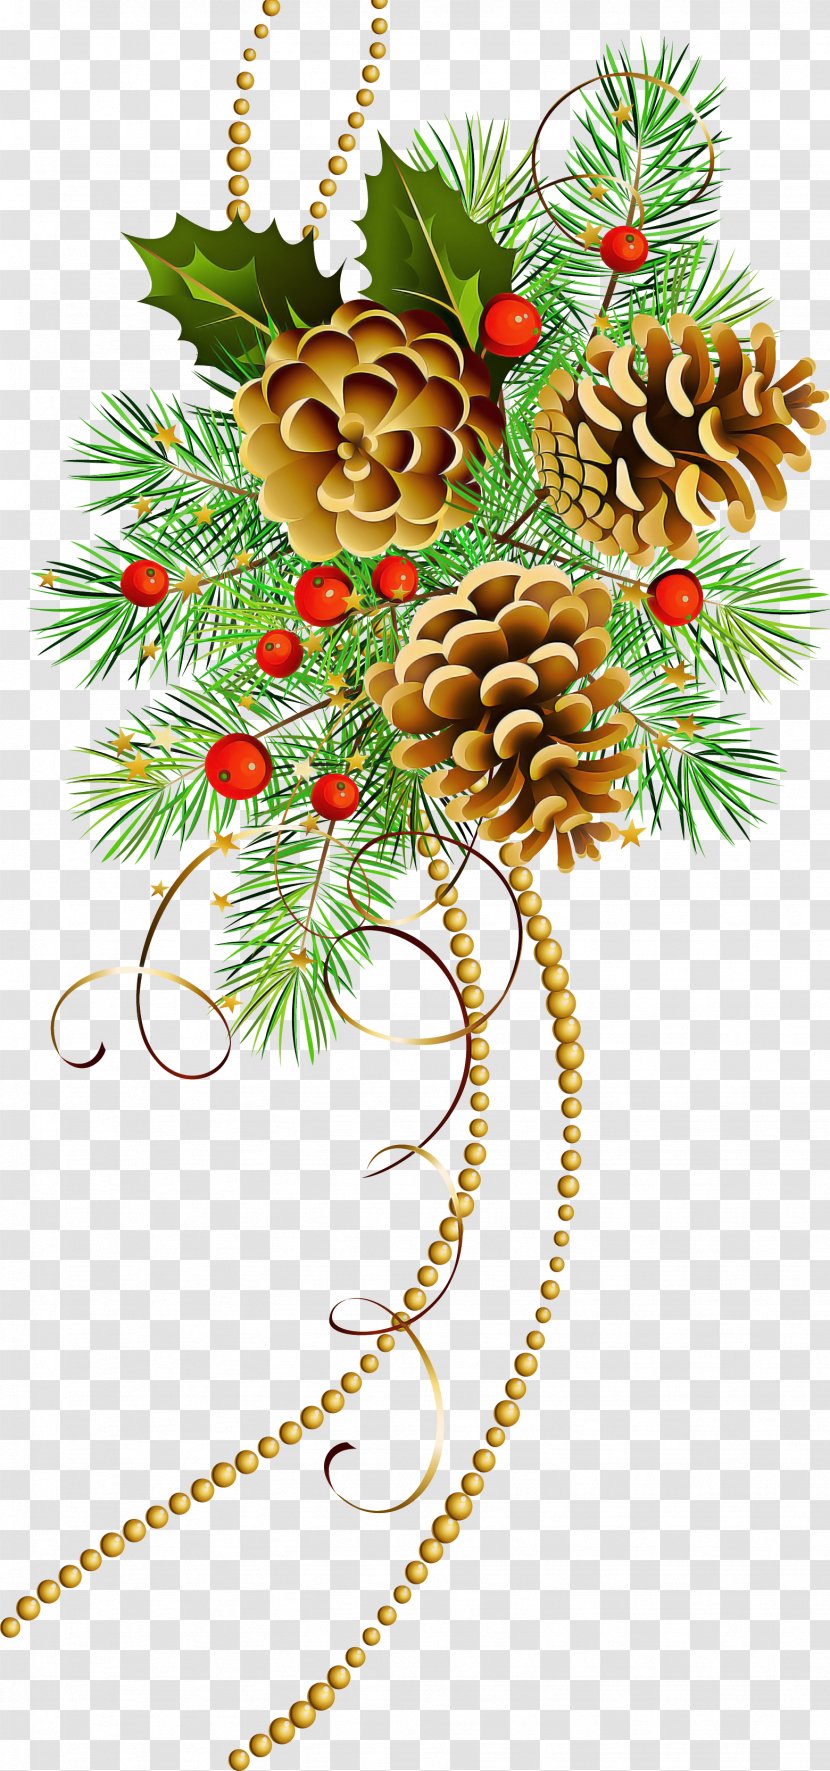 Holly - Plant - Woody Pine Family Transparent PNG